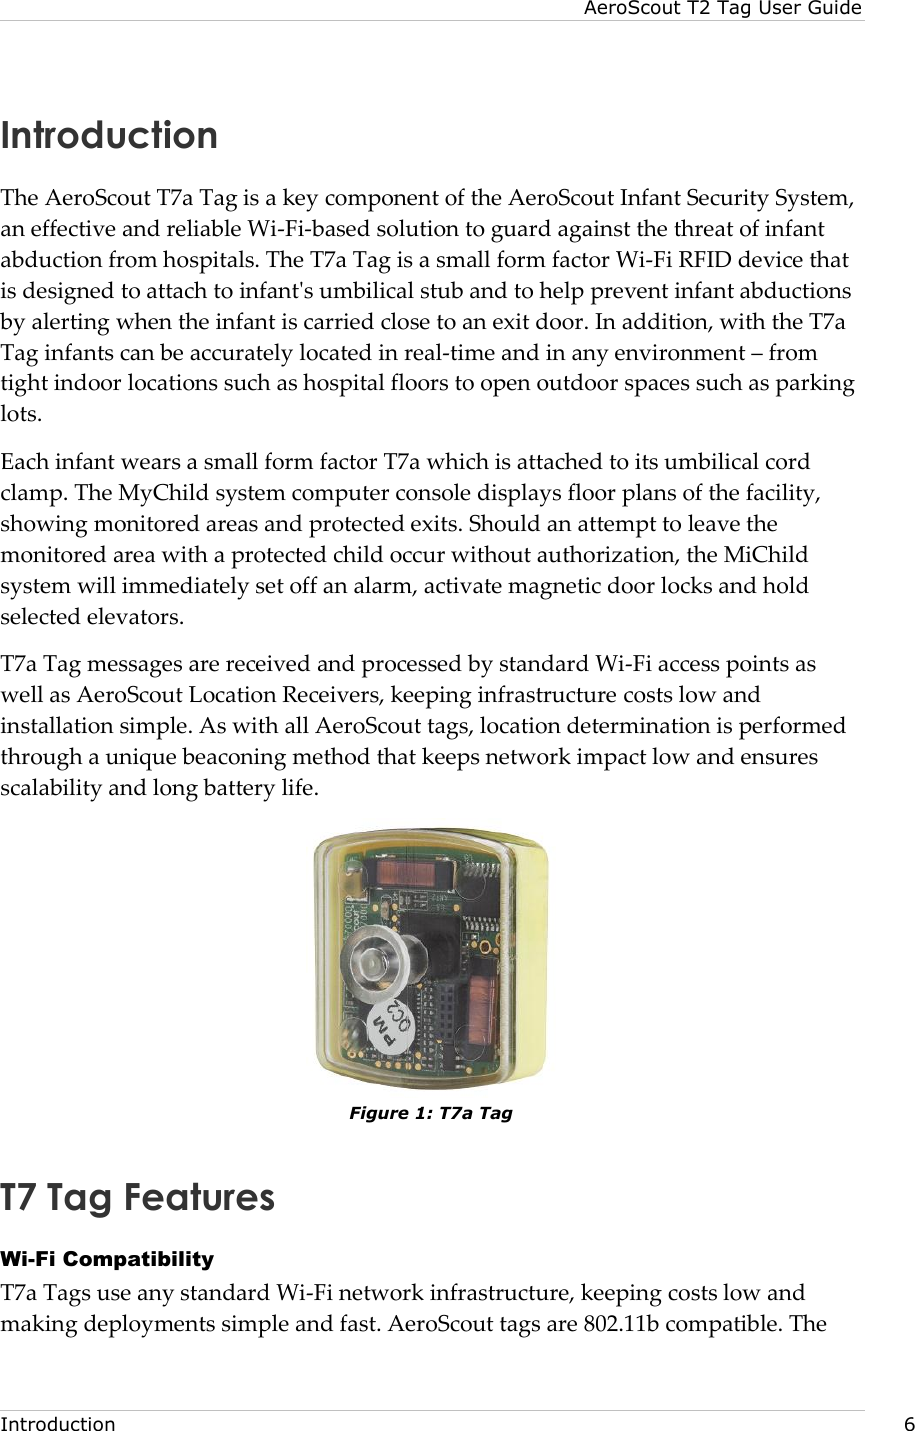 AeroScout T2 Tag User Guide  Introduction     6 Introduction The AeroScout T7a Tag is a key component of the AeroScout Infant Security System, an effective and reliable Wi-Fi-based solution to guard against the threat of infant abduction from hospitals. The T7a Tag is a small form factor Wi-Fi RFID device that is designed to attach to infant&apos;s umbilical stub and to help prevent infant abductions by alerting when the infant is carried close to an exit door. In addition, with the T7a Tag infants can be accurately located in real-time and in any environment – from tight indoor locations such as hospital floors to open outdoor spaces such as parking lots. Each infant wears a small form factor T7a which is attached to its umbilical cord clamp. The MyChild system computer console displays floor plans of the facility, showing monitored areas and protected exits. Should an attempt to leave the monitored area with a protected child occur without authorization, the MiChild system will immediately set off an alarm, activate magnetic door locks and hold selected elevators. T7a Tag messages are received and processed by standard Wi-Fi access points as well as AeroScout Location Receivers, keeping infrastructure costs low and installation simple. As with all AeroScout tags, location determination is performed through a unique beaconing method that keeps network impact low and ensures scalability and long battery life.  Figure 1: T7a Tag T7 Tag Features Wi-Fi Compatibility T7a Tags use any standard Wi-Fi network infrastructure, keeping costs low and making deployments simple and fast. AeroScout tags are 802.11b compatible. The 